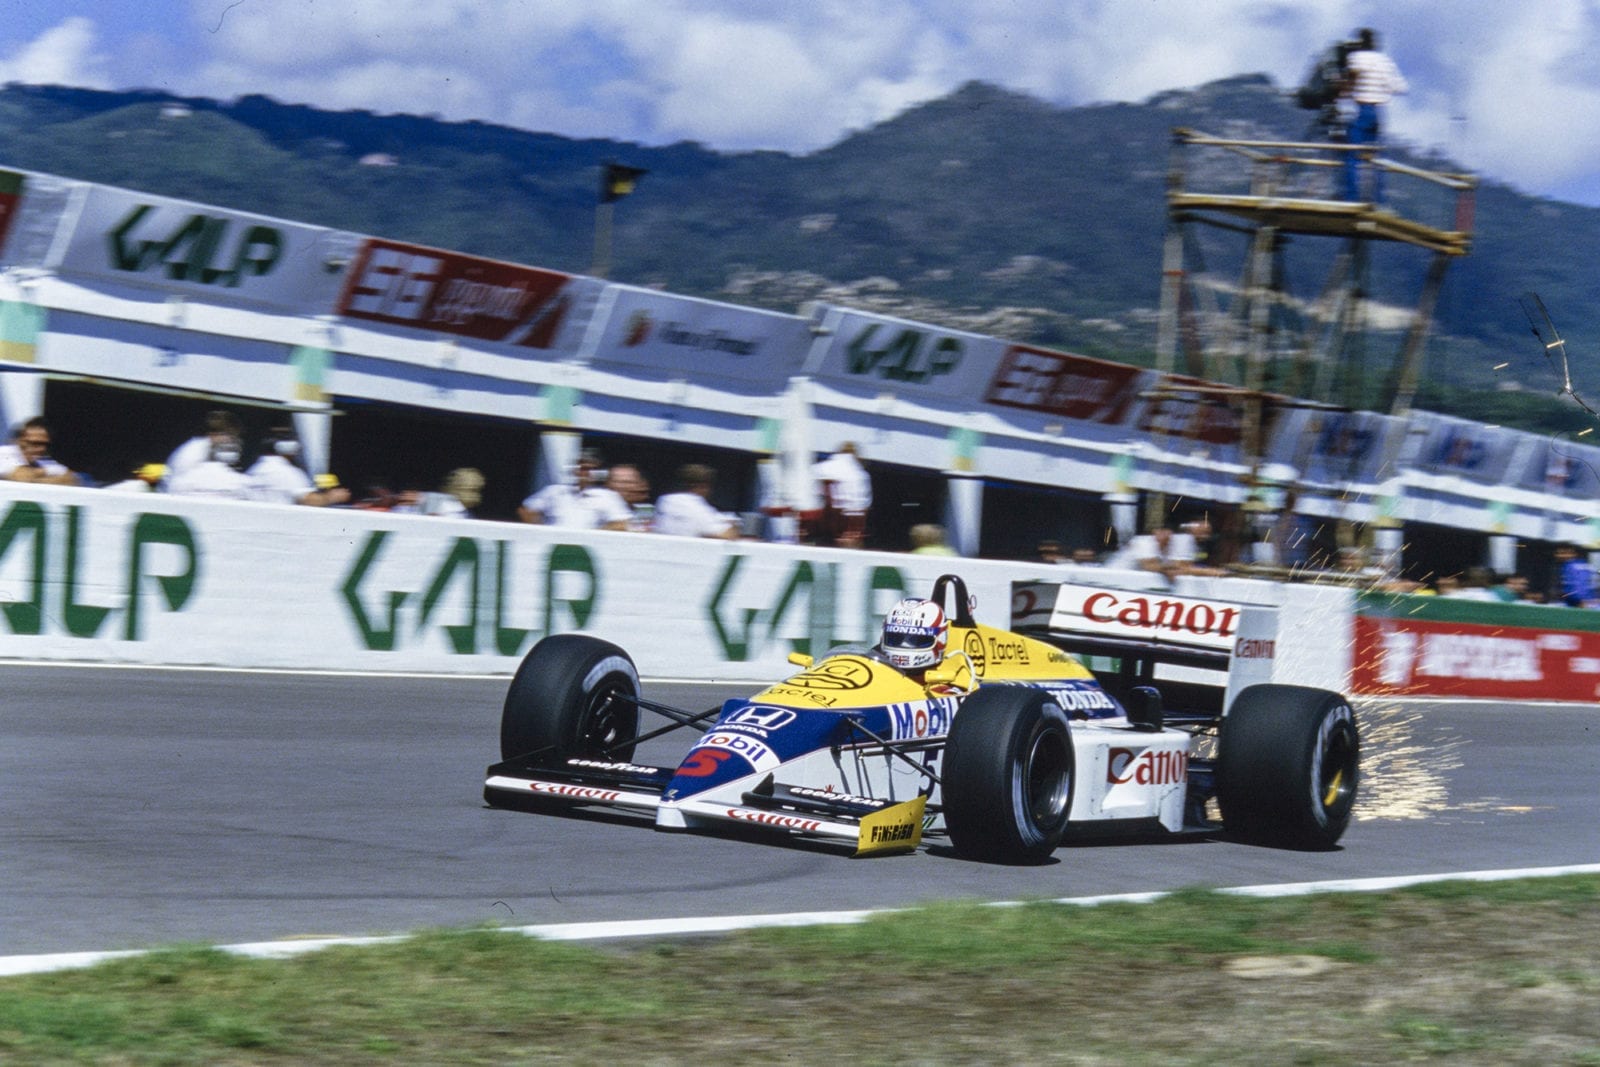 Sparks fly from Nigel Mansell's Williams in the 1986 Portuguese Grand Prix